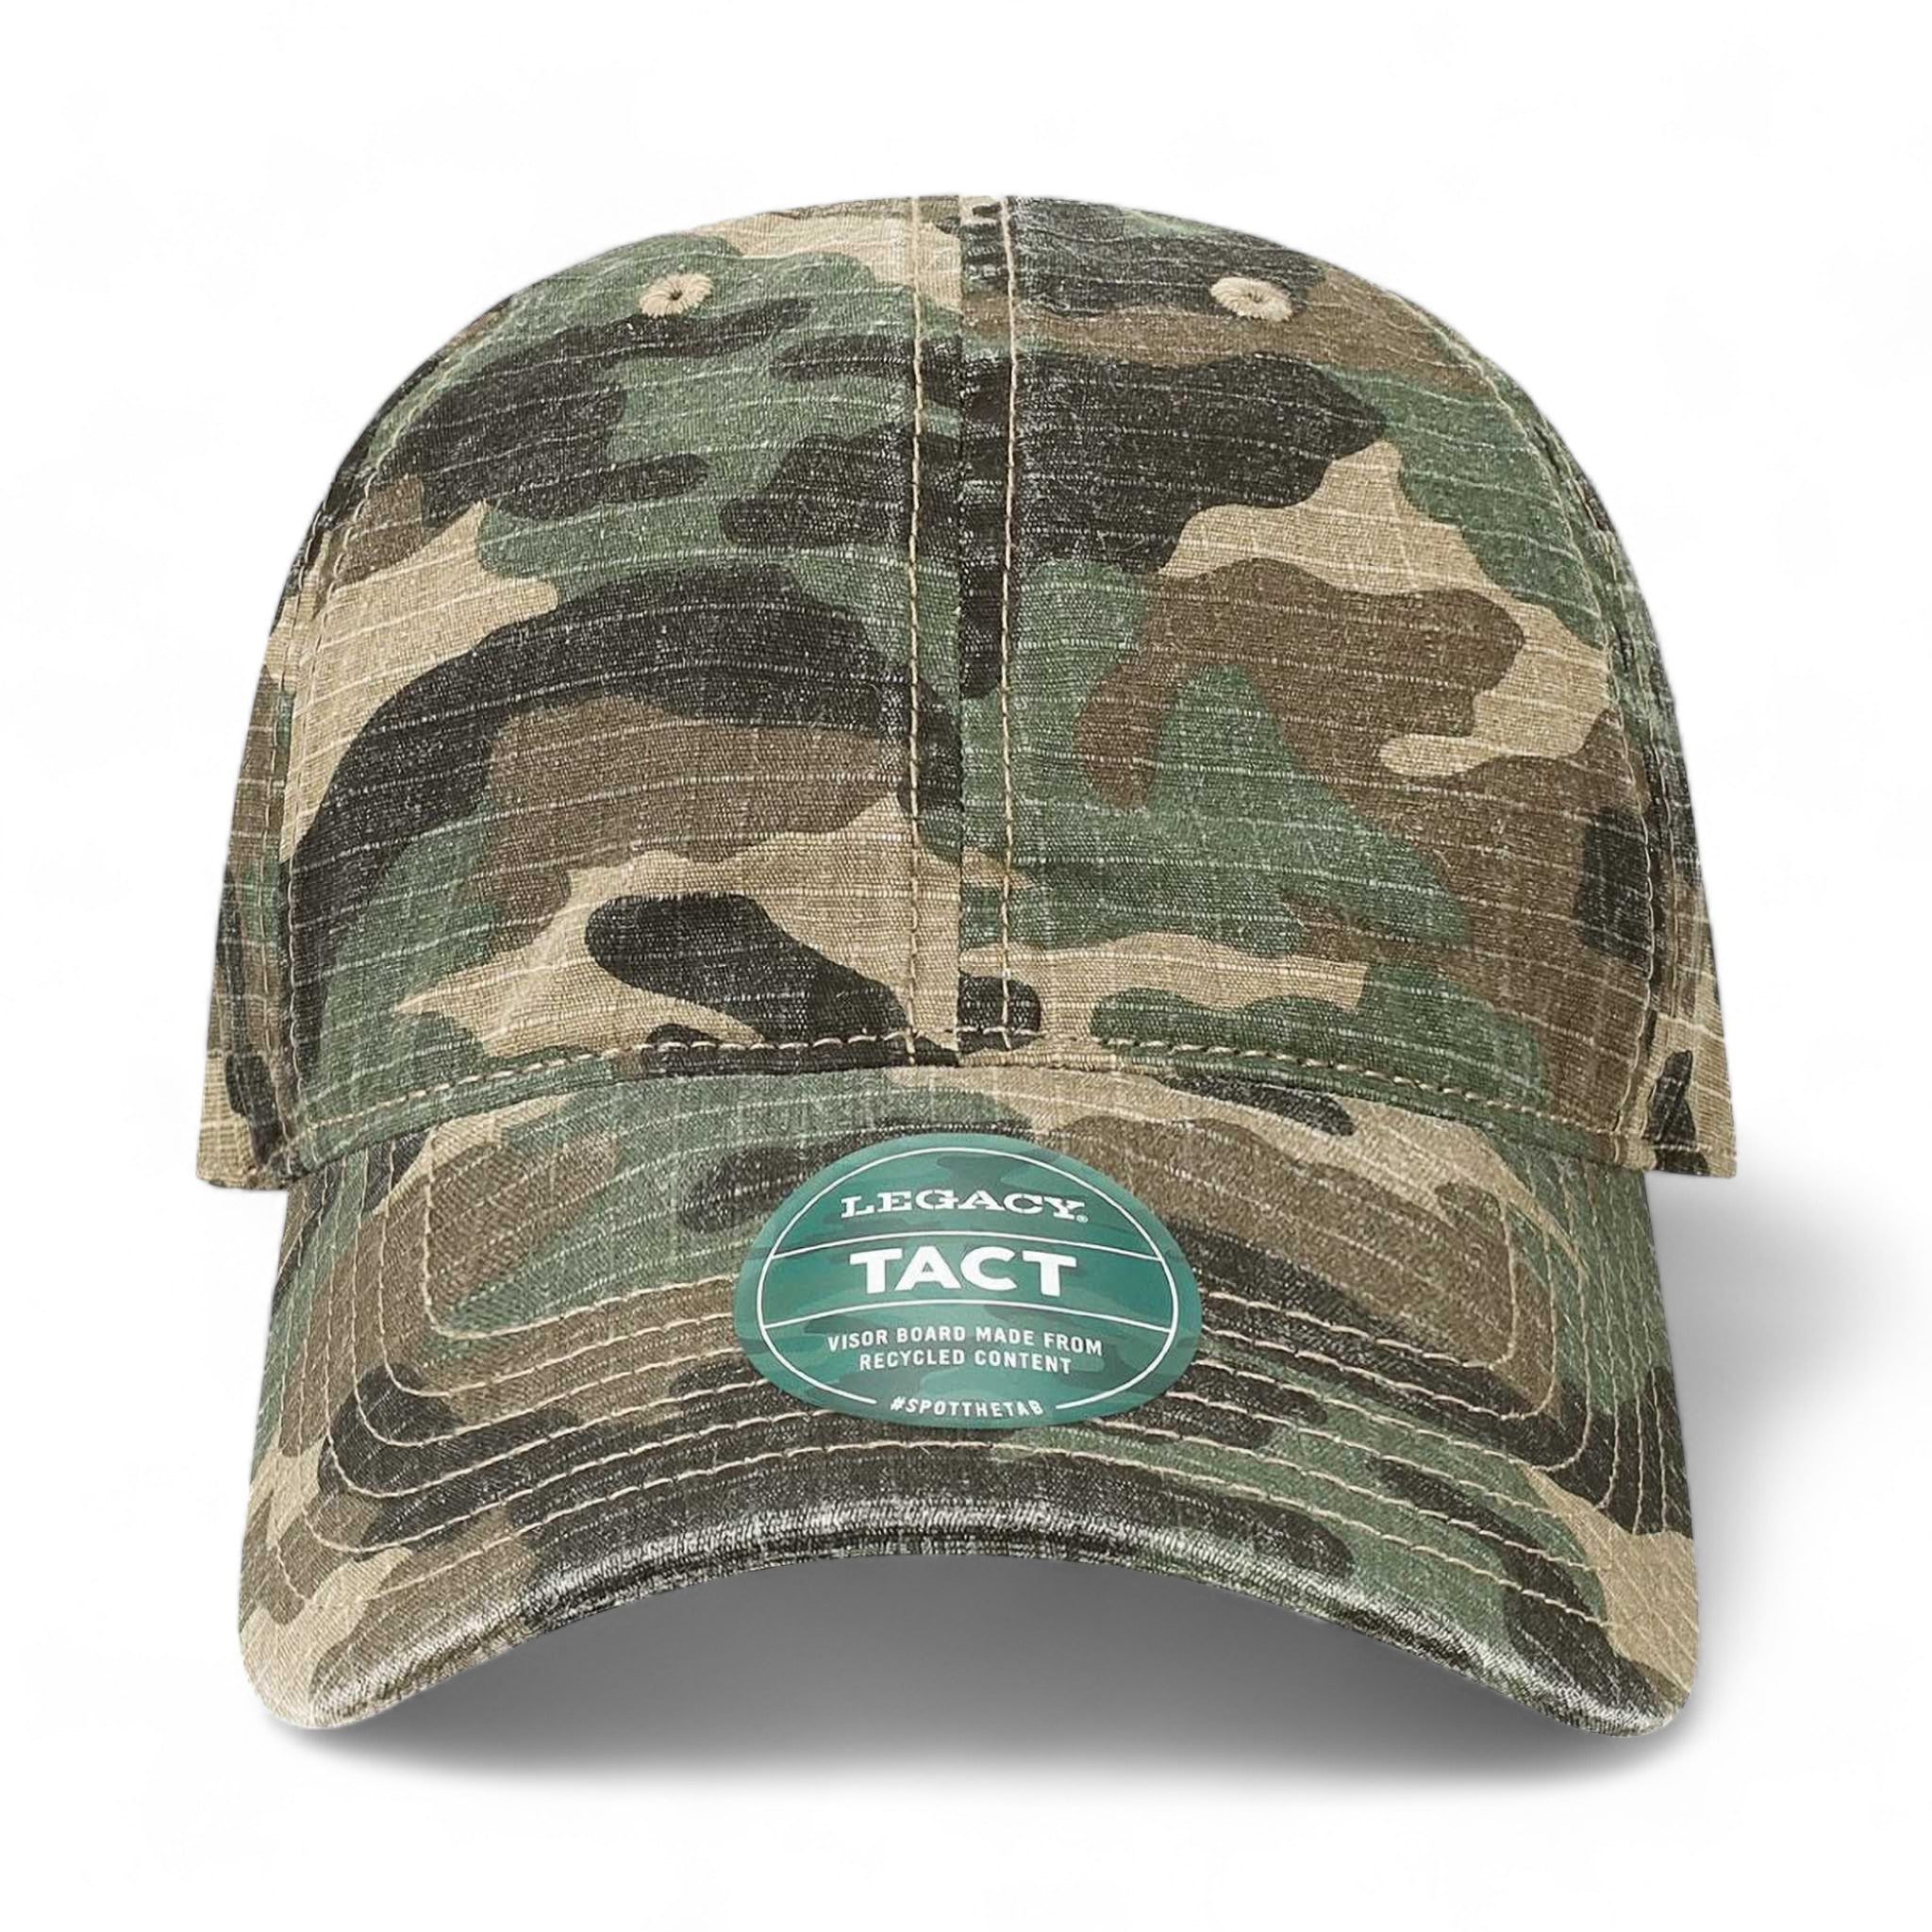 Front view of LEGACY TACT custom hat in army camo